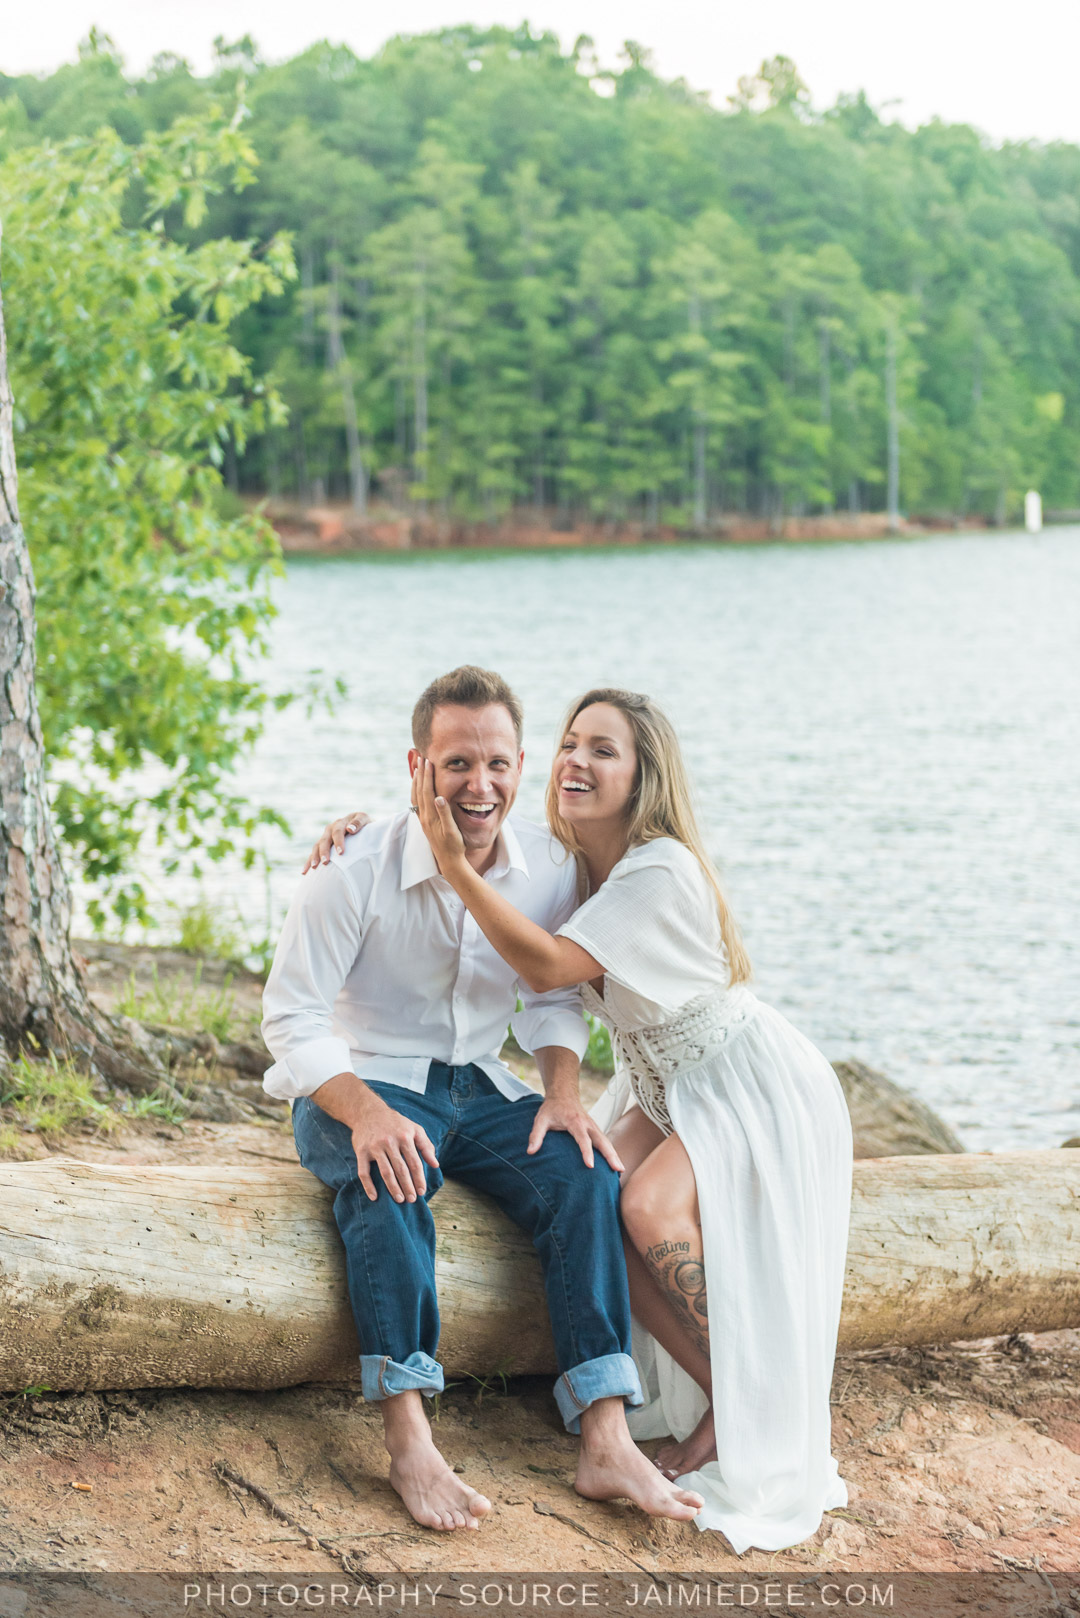 Summer Engagement Photos - Personality